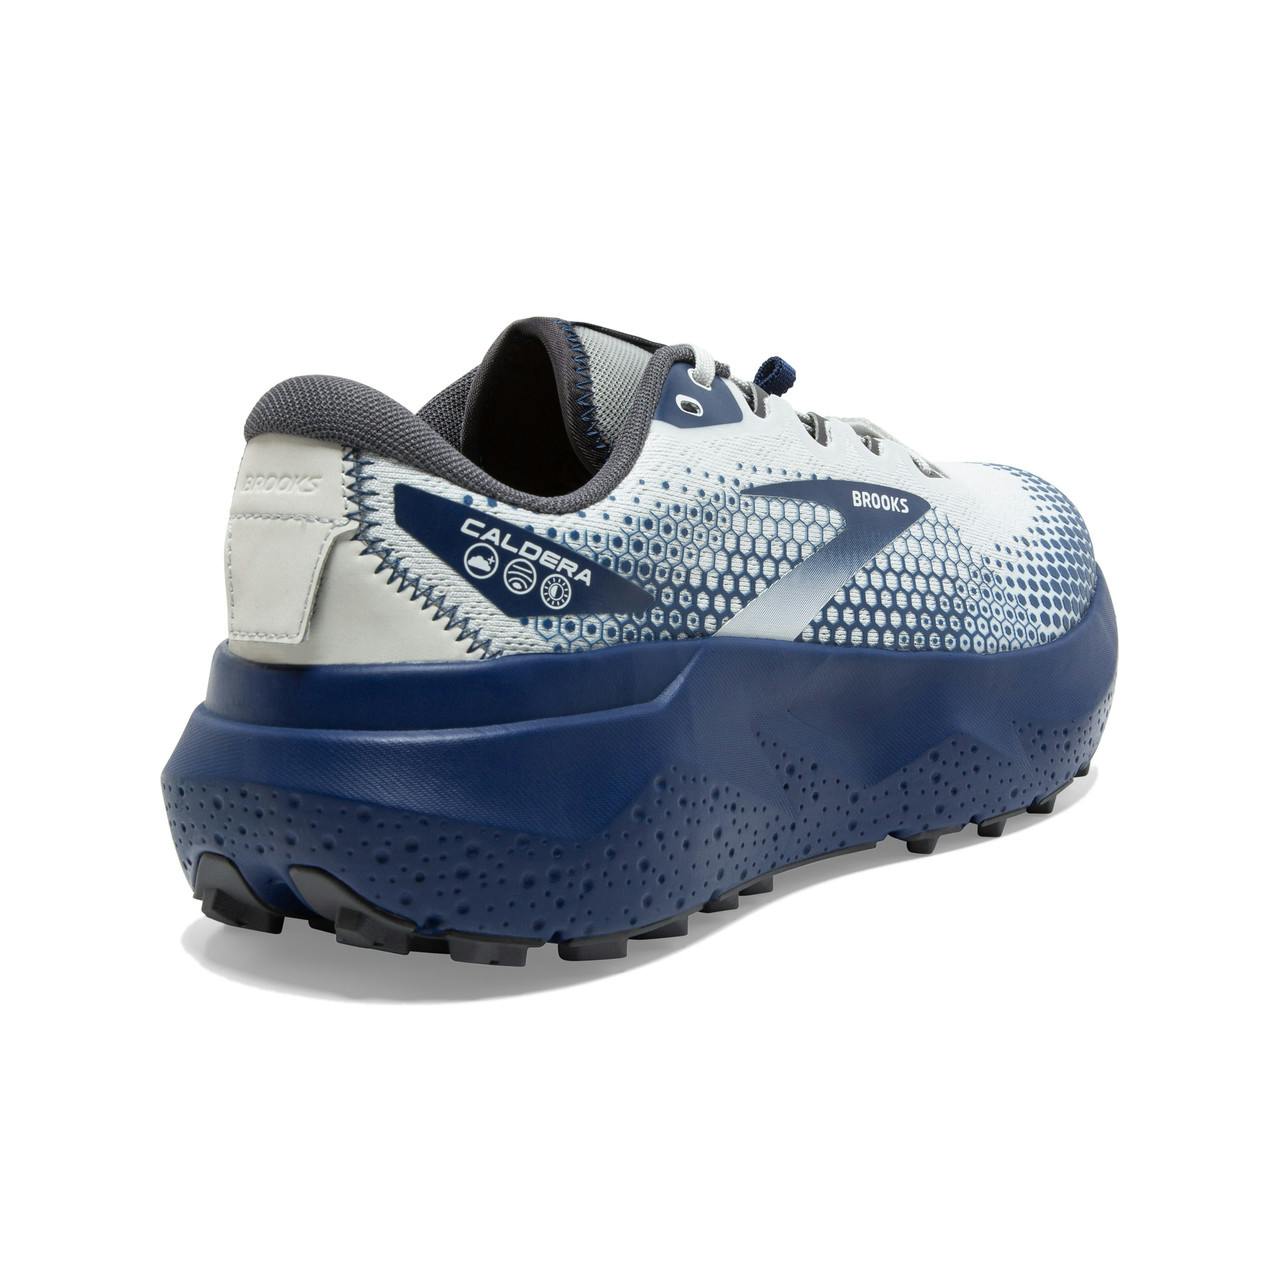 Caldera 6 Trail Running Shoes Oyster/Blue Depths/Pearl